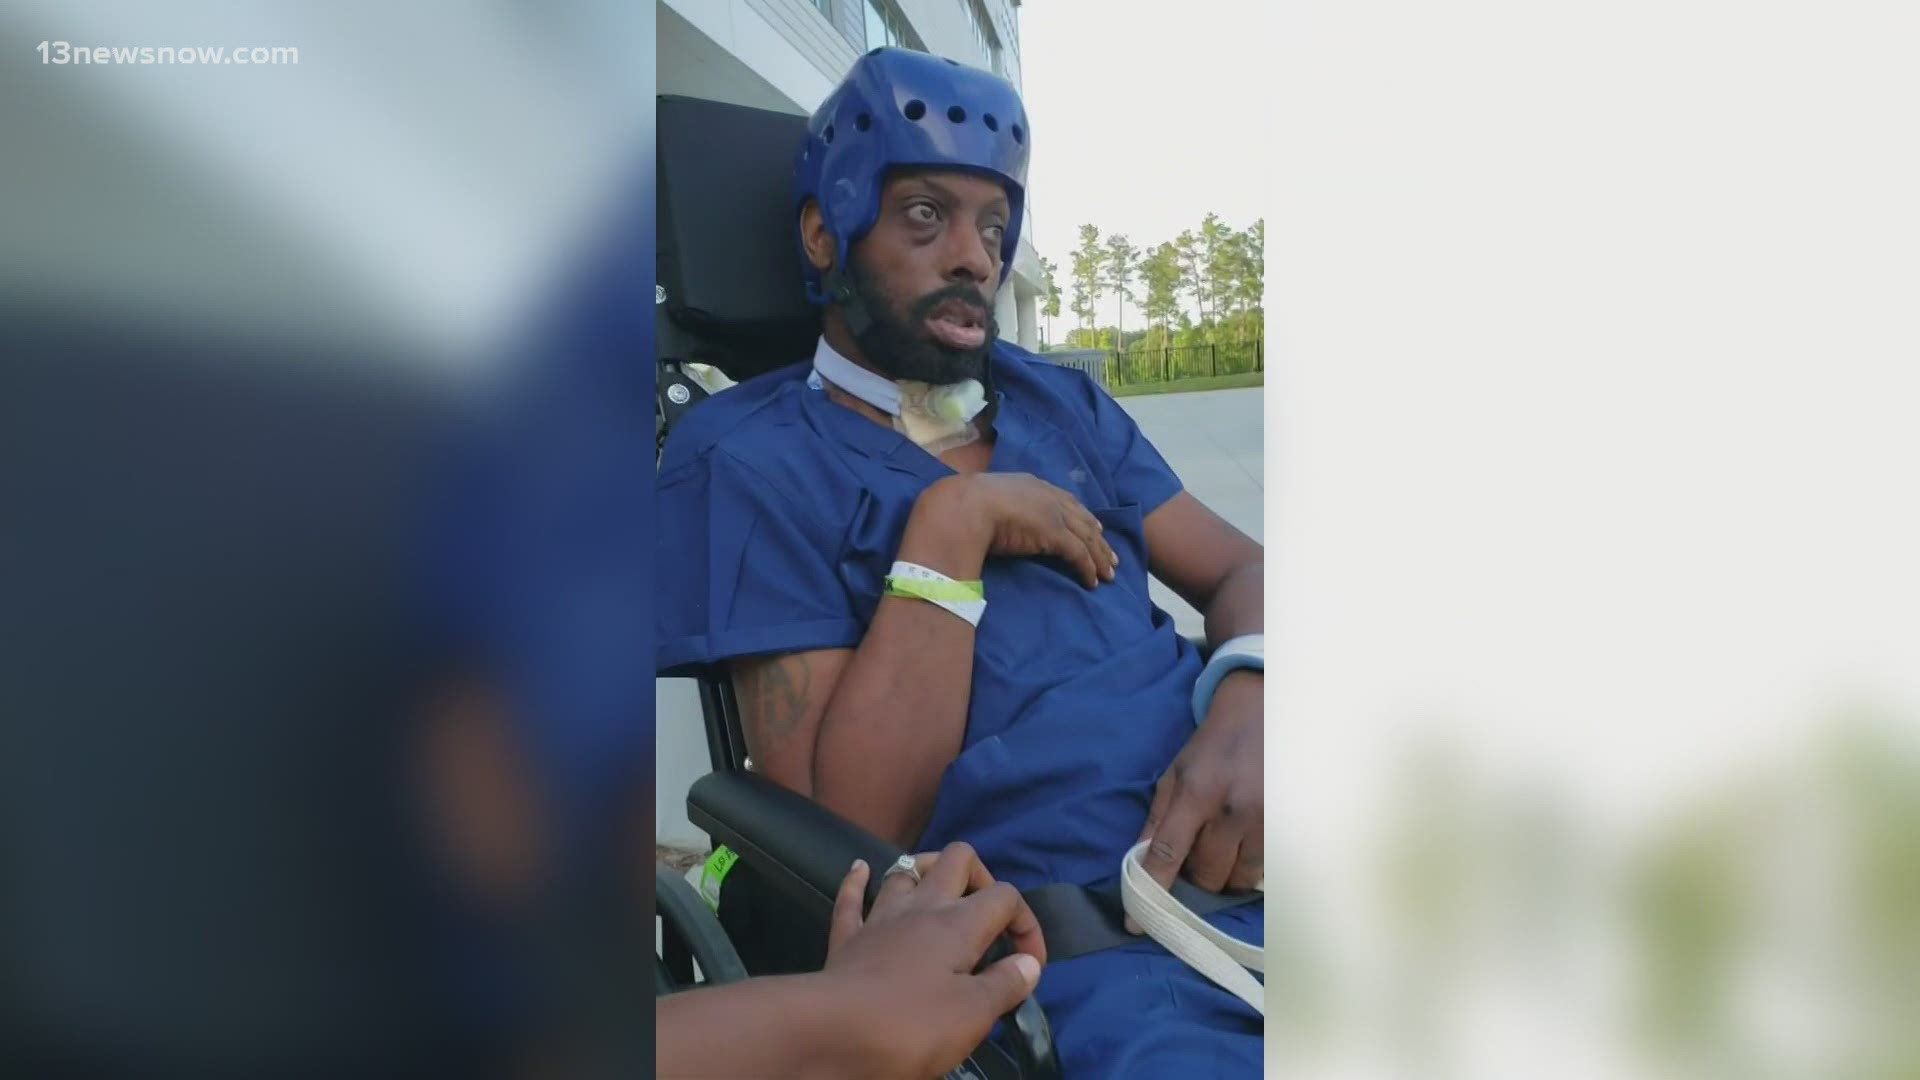 Chris Green suffered a traumatic brain injury when a Confederate statue fell on him during a protest in Portsmouth in 2020. He ended up in a coma.